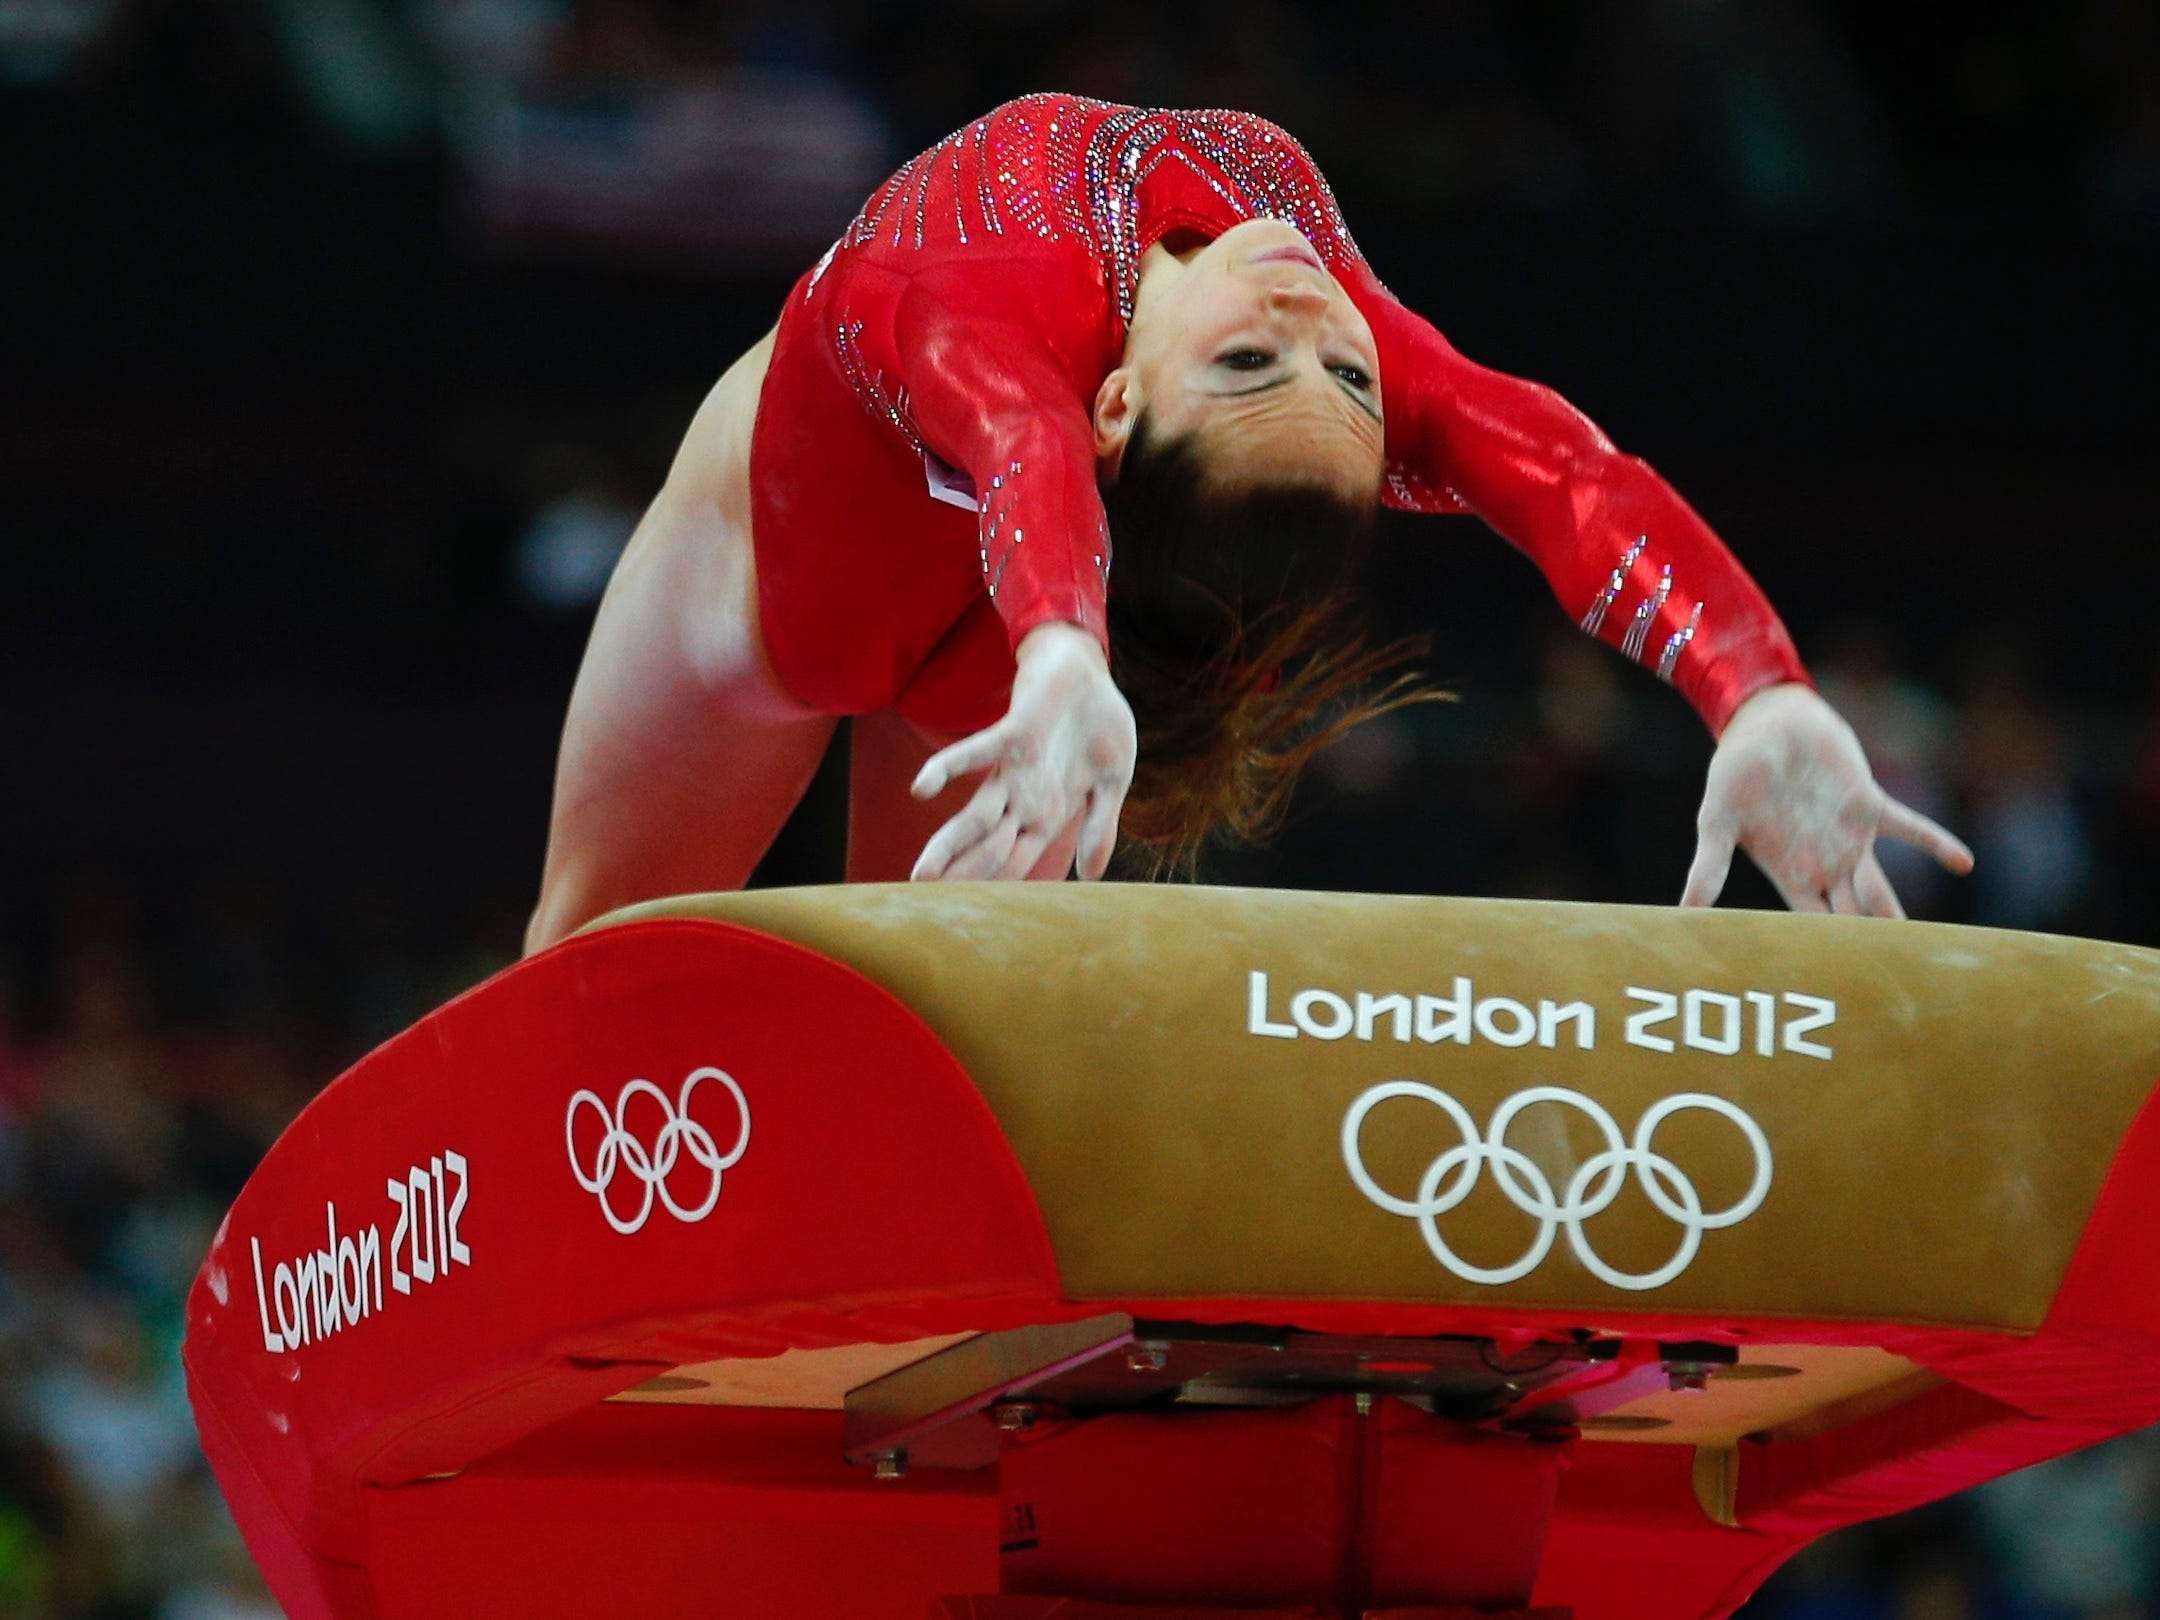 McKayla Maroney says she was forced to compete with a broken foot in the 20...